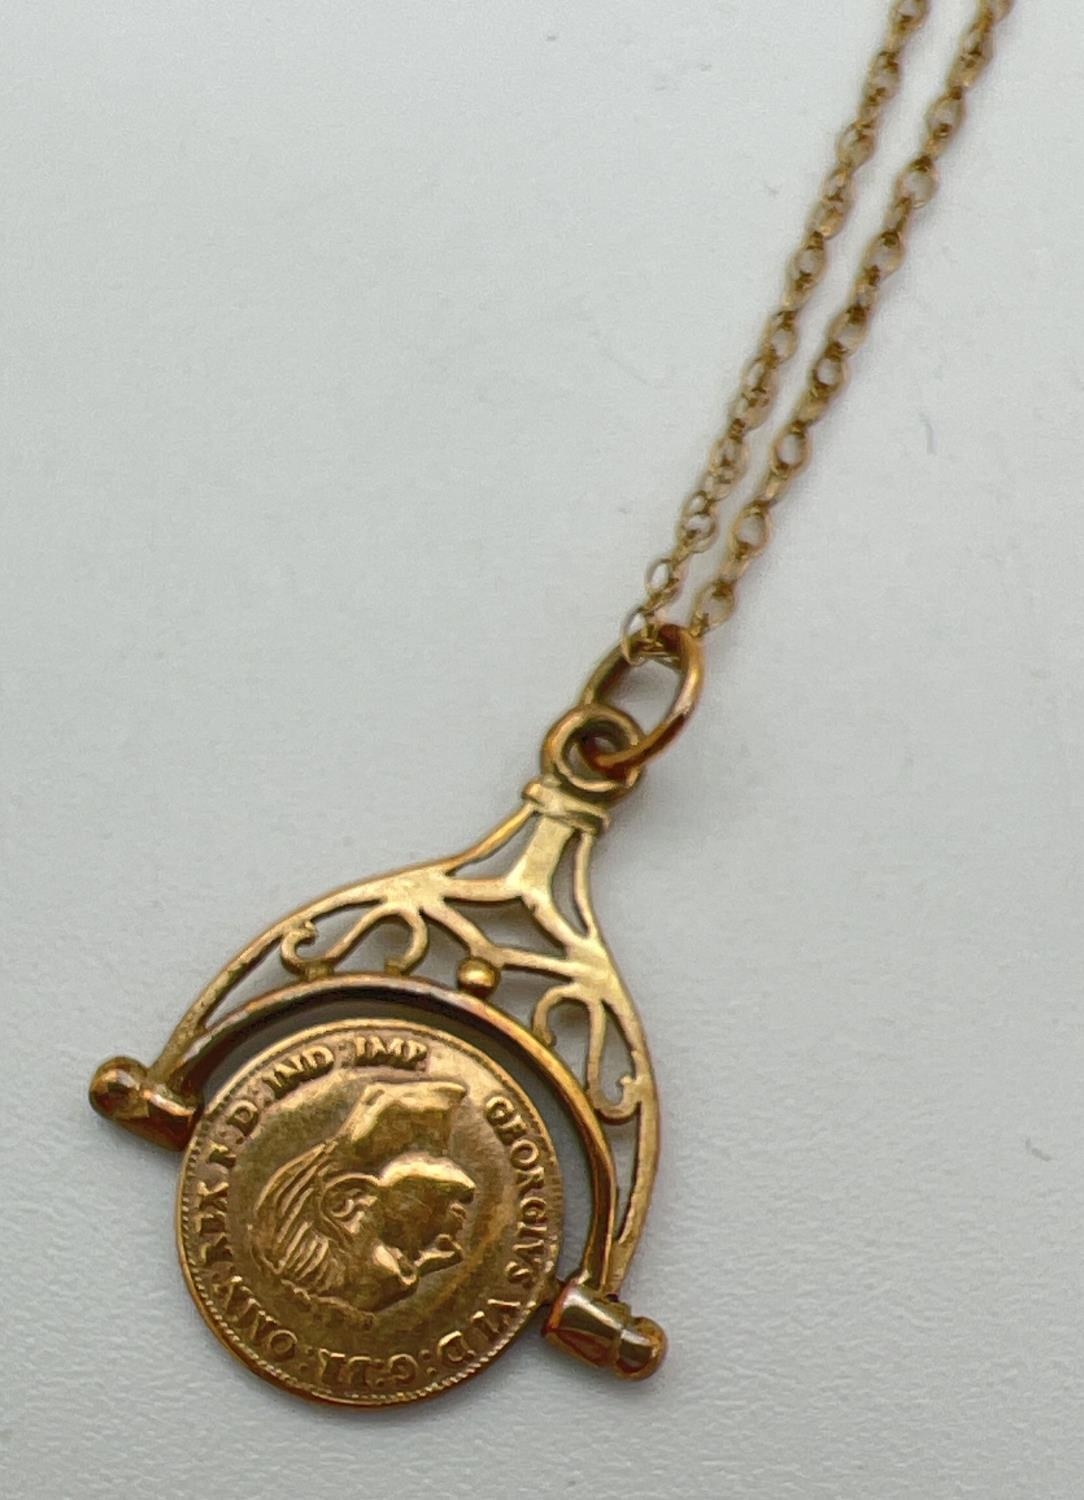 A 9ct gold George VI spinning farthing pendant on a 16" double belcher chain with spring ring clasp.